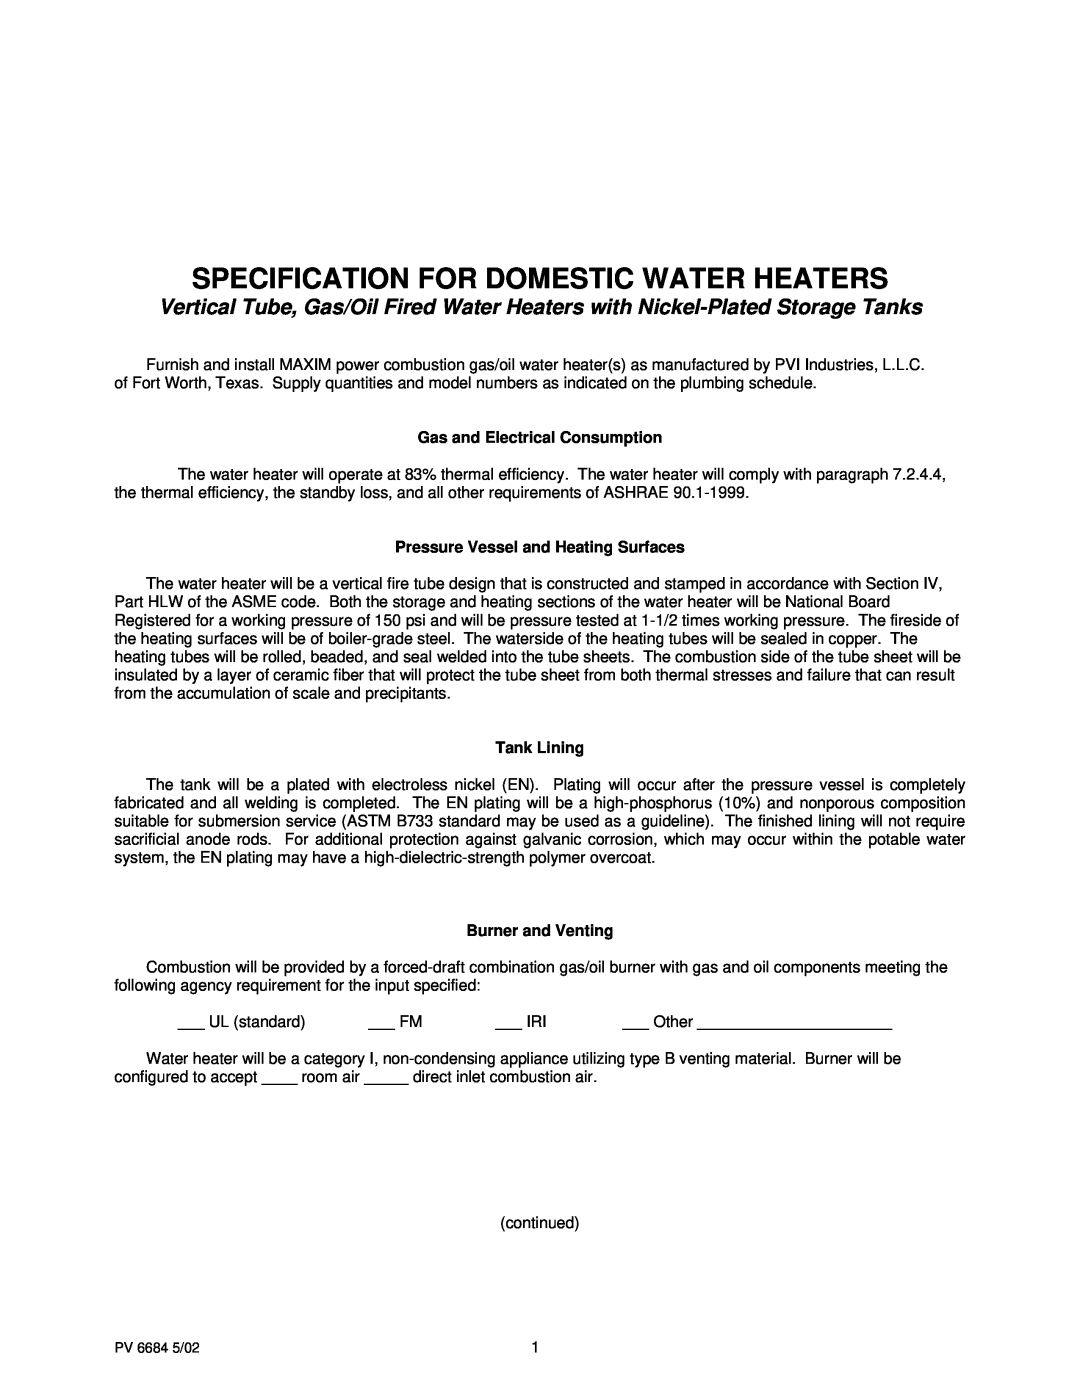 PVI Industries PV 6684 manual Specification For Domestic Water Heaters, Gas and Electrical Consumption, Tank Lining 